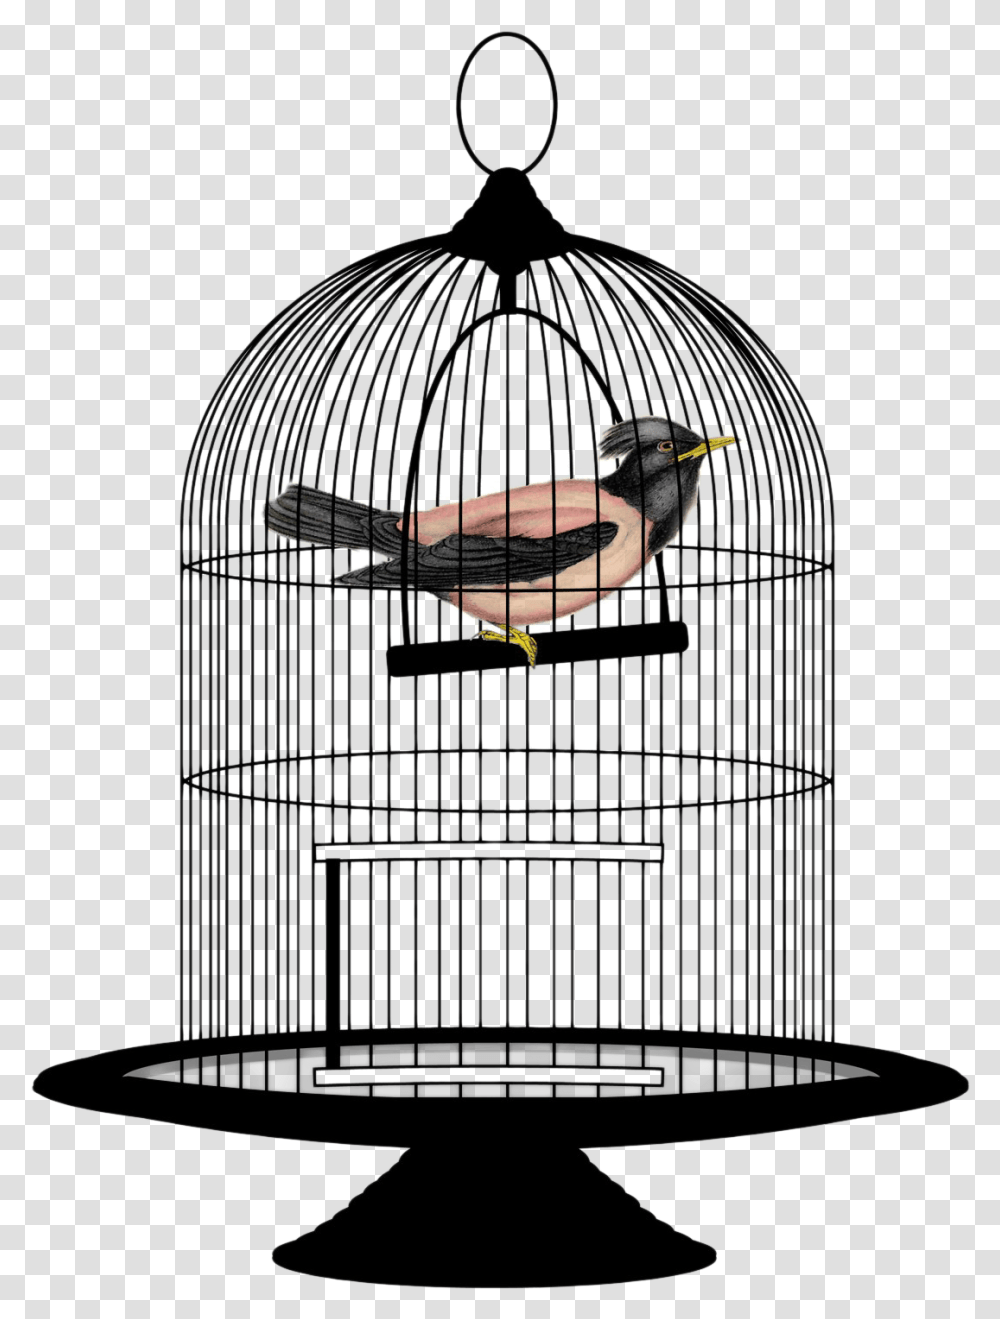 Cage Bird Image Bird In A Cage, Gate, Appliance Transparent Png